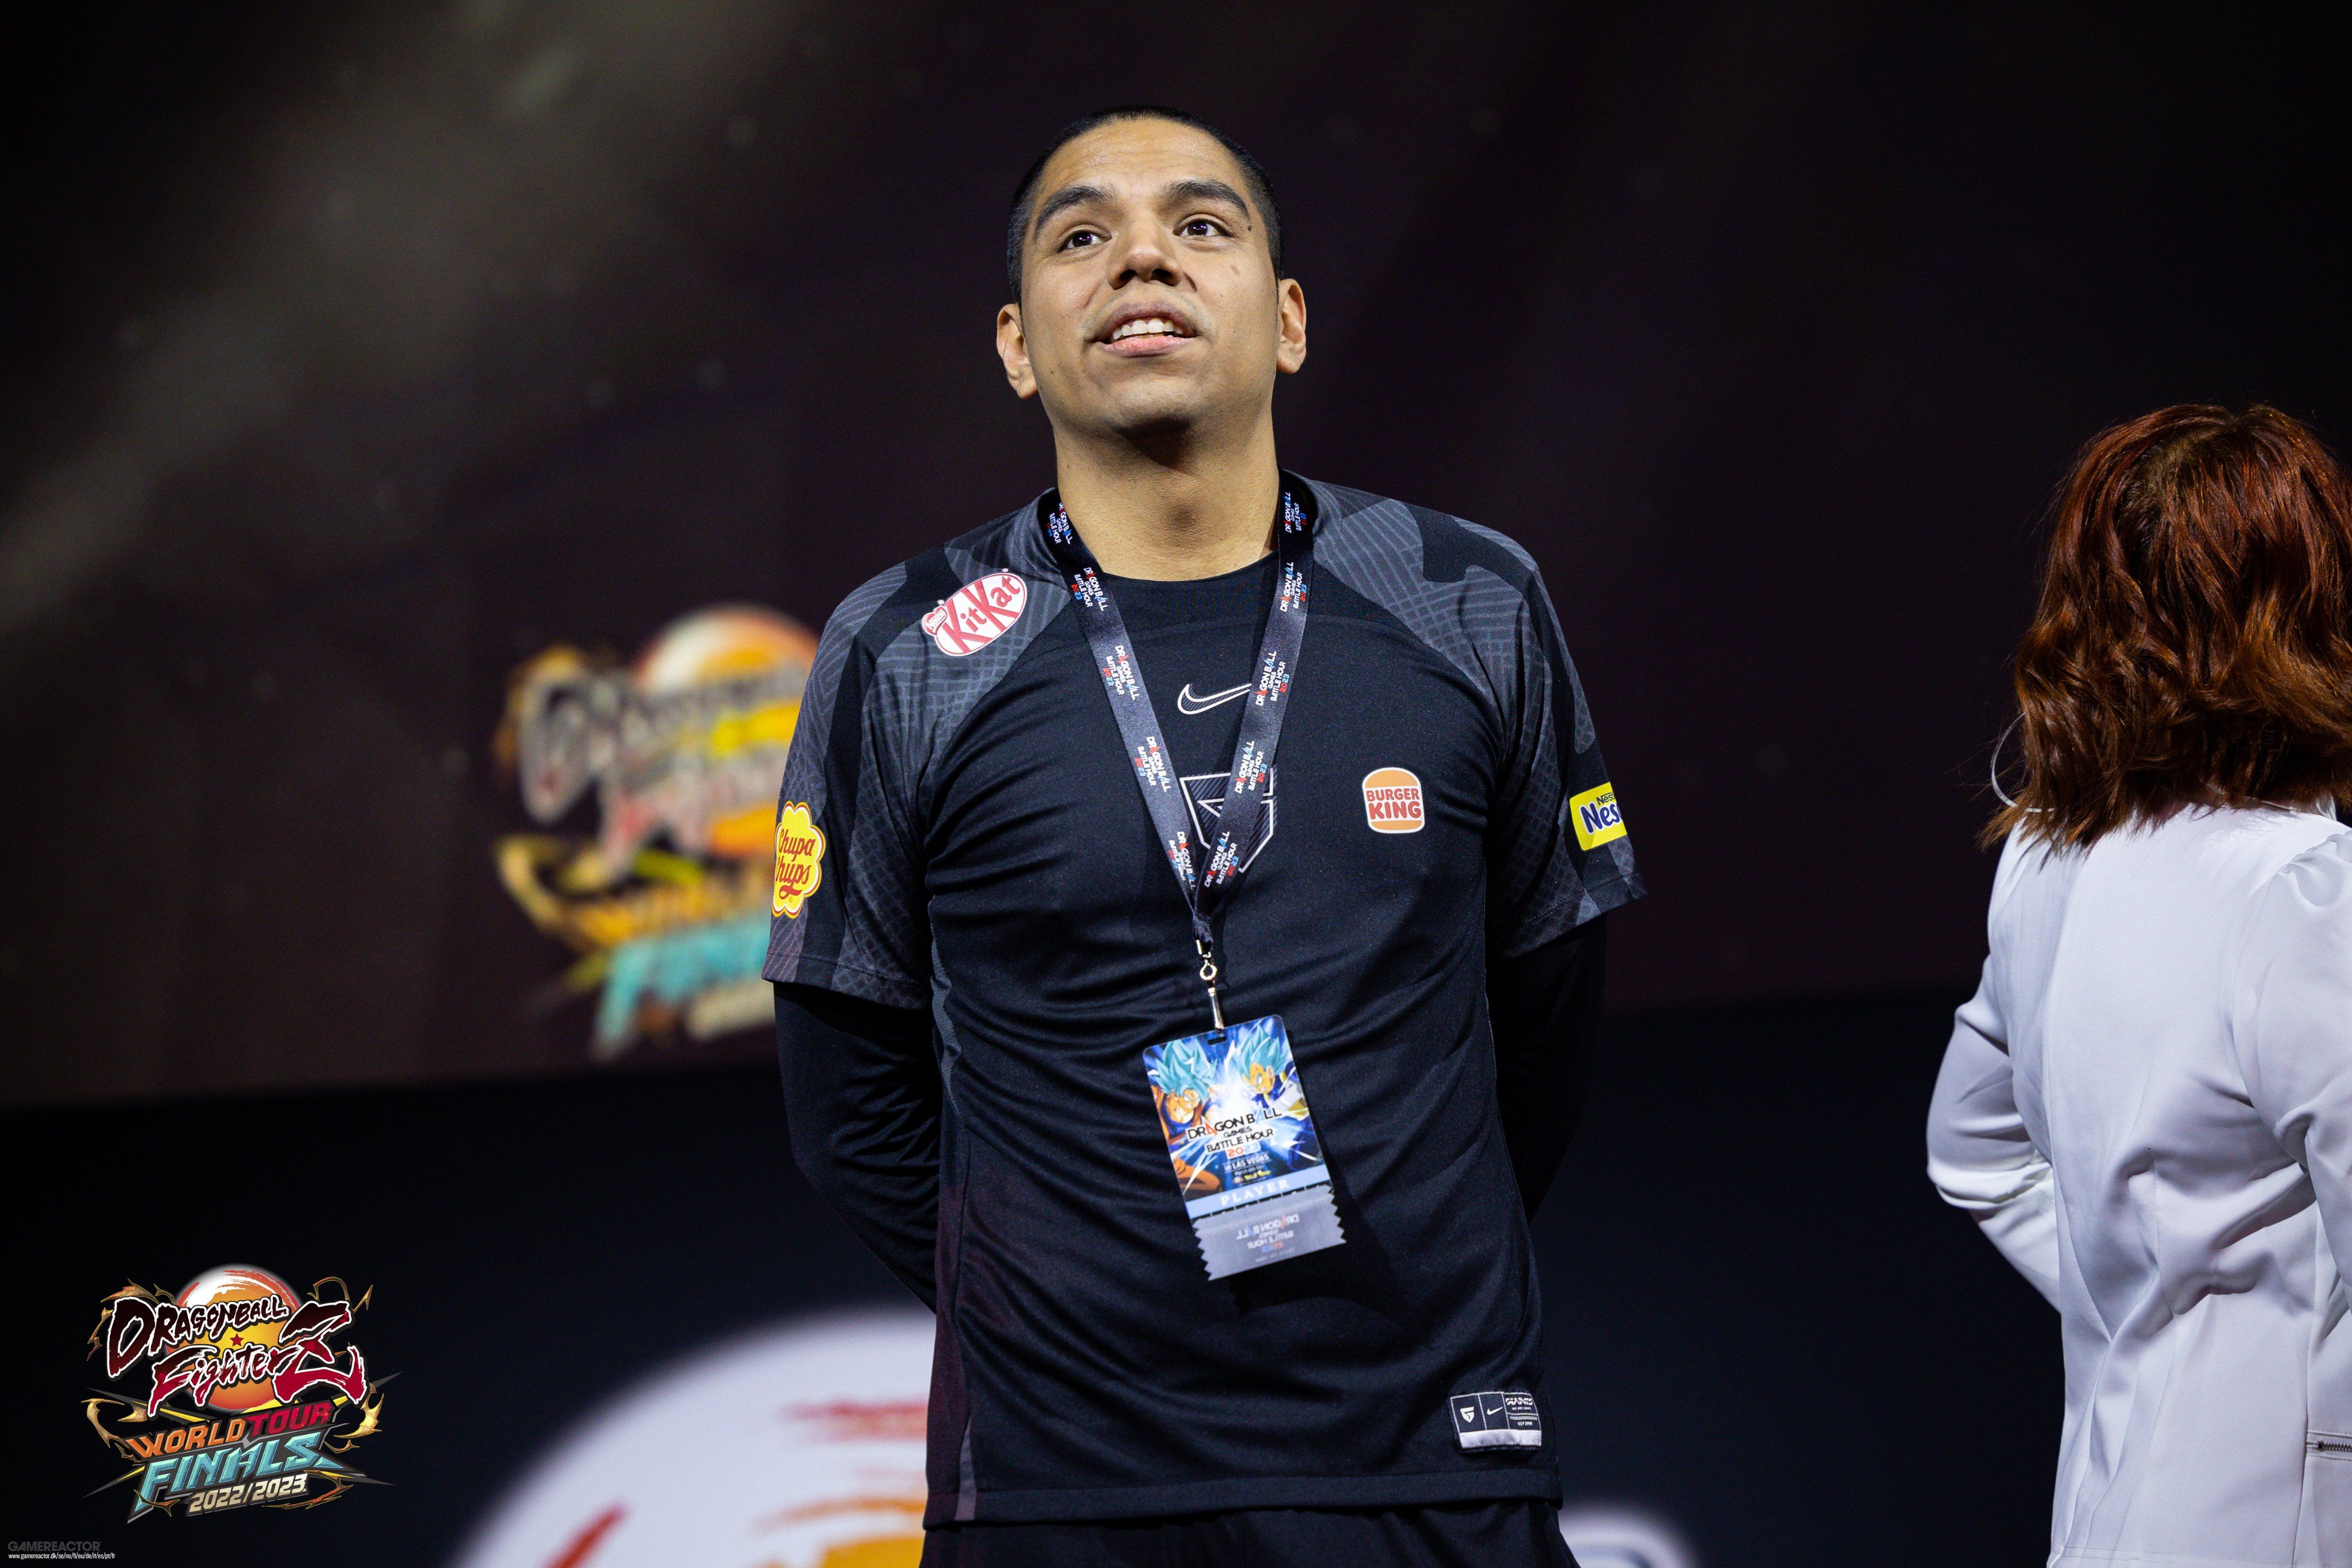 Shanks, the Giants player, was fourth in the world in Dragon Ball FighterZ